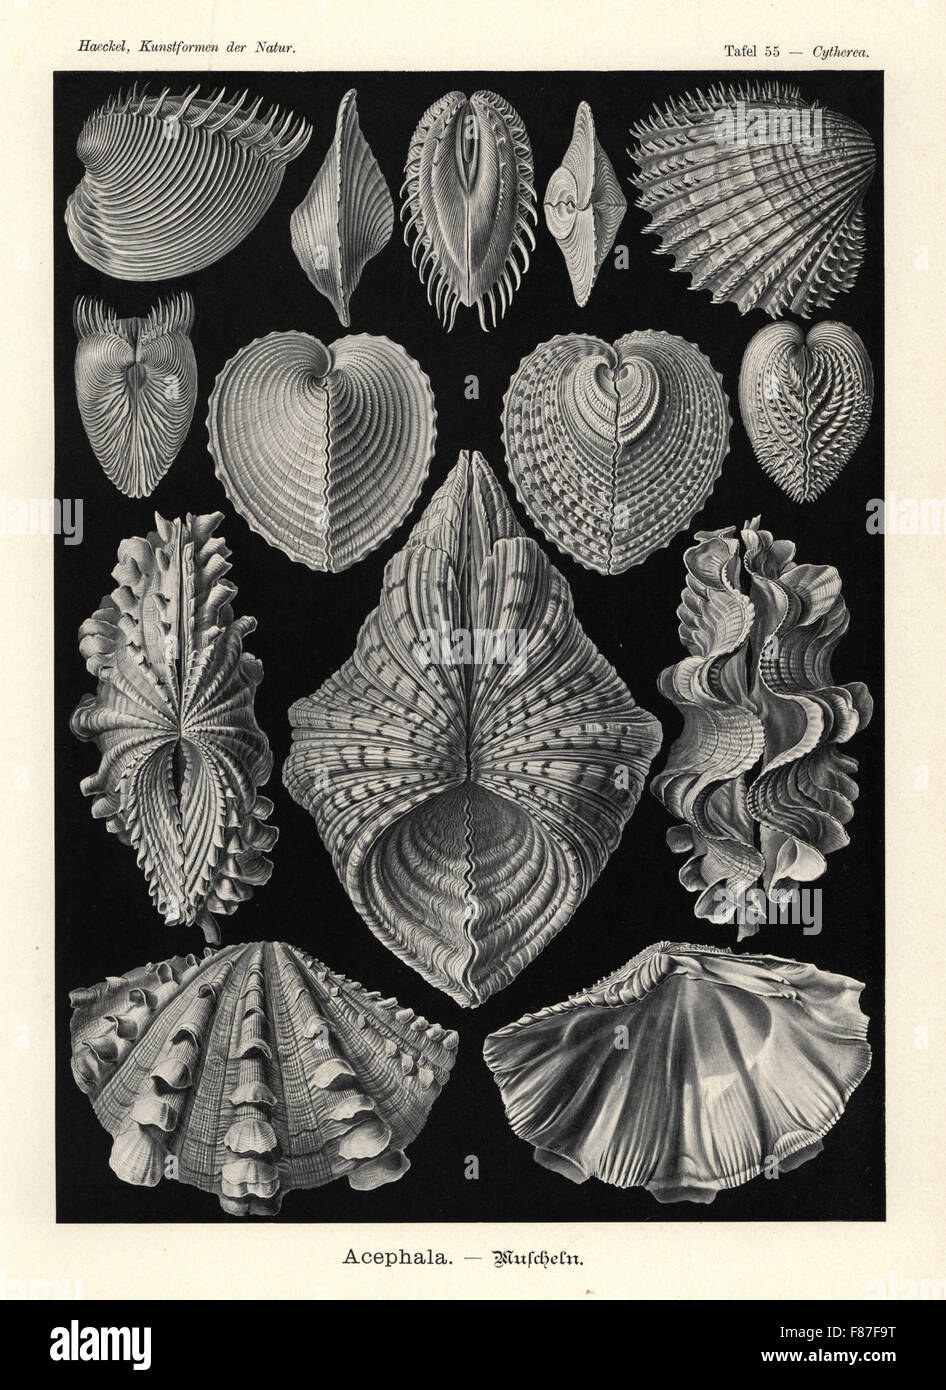 Bivalvia clam shells: Venus clam, Hysteroconcha dione 1-3, spiny cockle, Acanthocardia aculeata 4,5, heart cockle, Corculum cardissa 6-9, fluted giant clam, Tridacna squamosa 10-13 and bear paw clam, Hippopus hippopus 14. Chromolithograph by Adolf Glitsch from an illustration by Ernst Haeckel from Art Forms in Nature, Kunstformen der Natur, Liepzig, Germany, 1904. Stock Photo